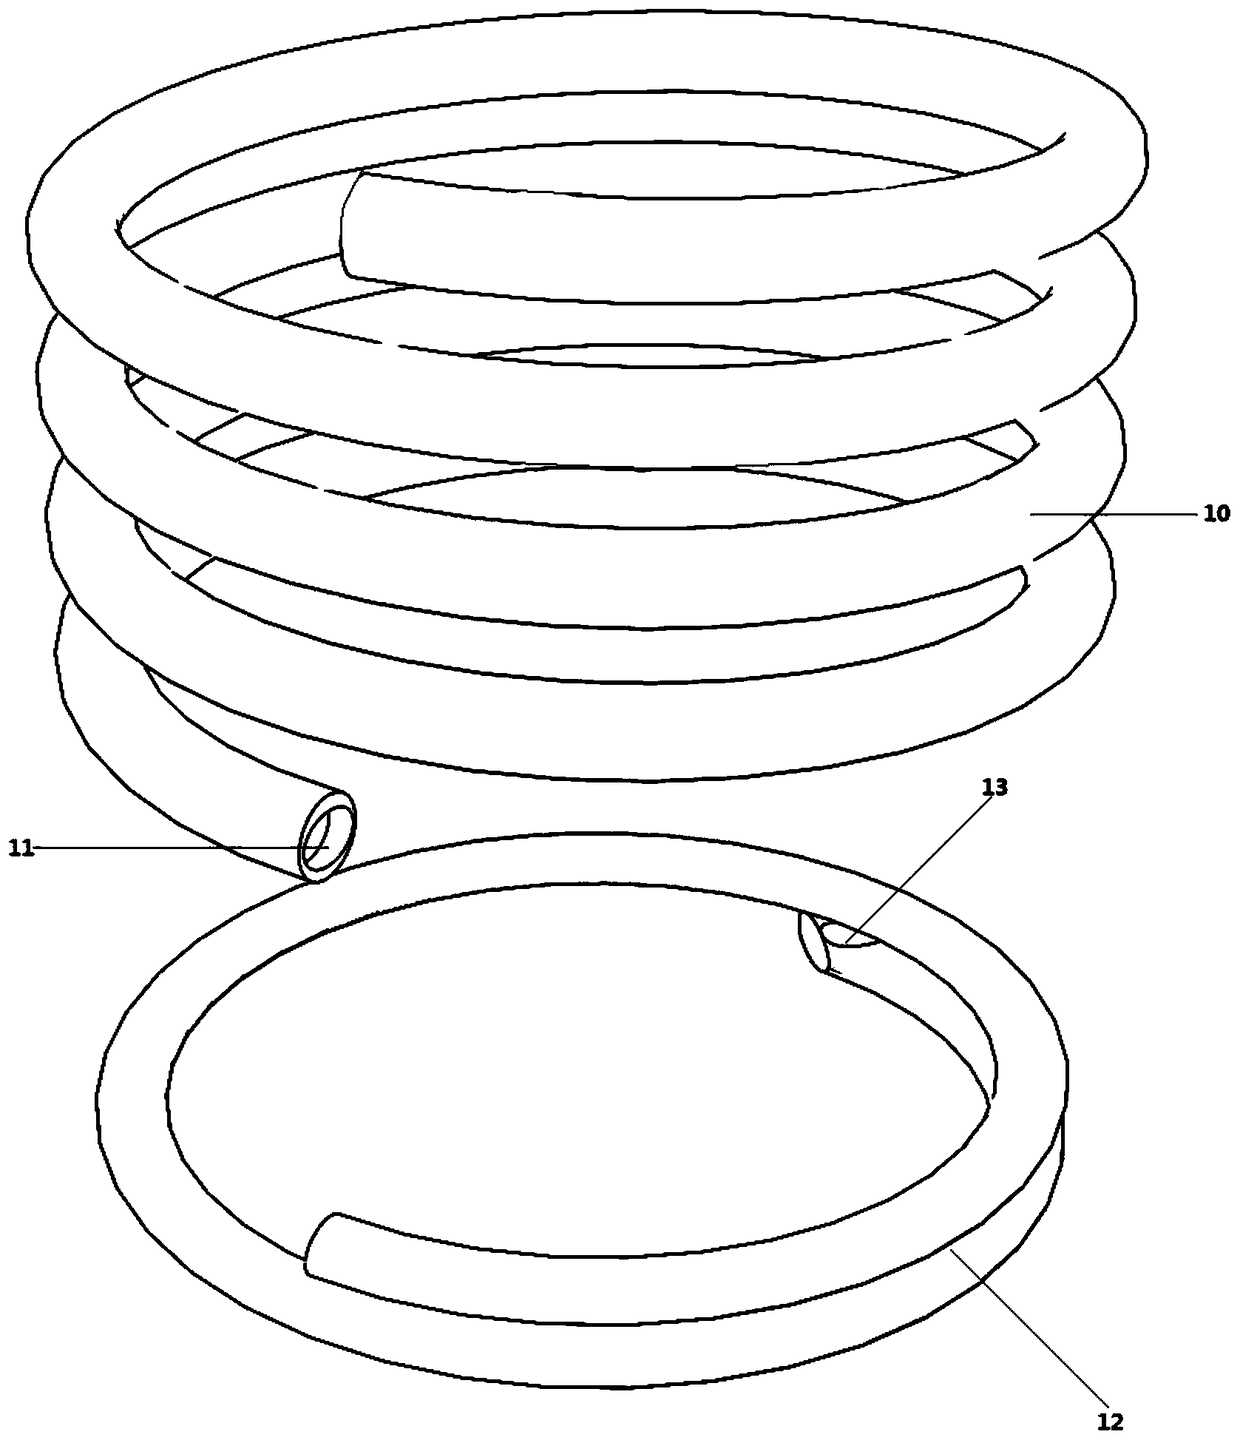 Artificial implanted valve adapter mounting ring